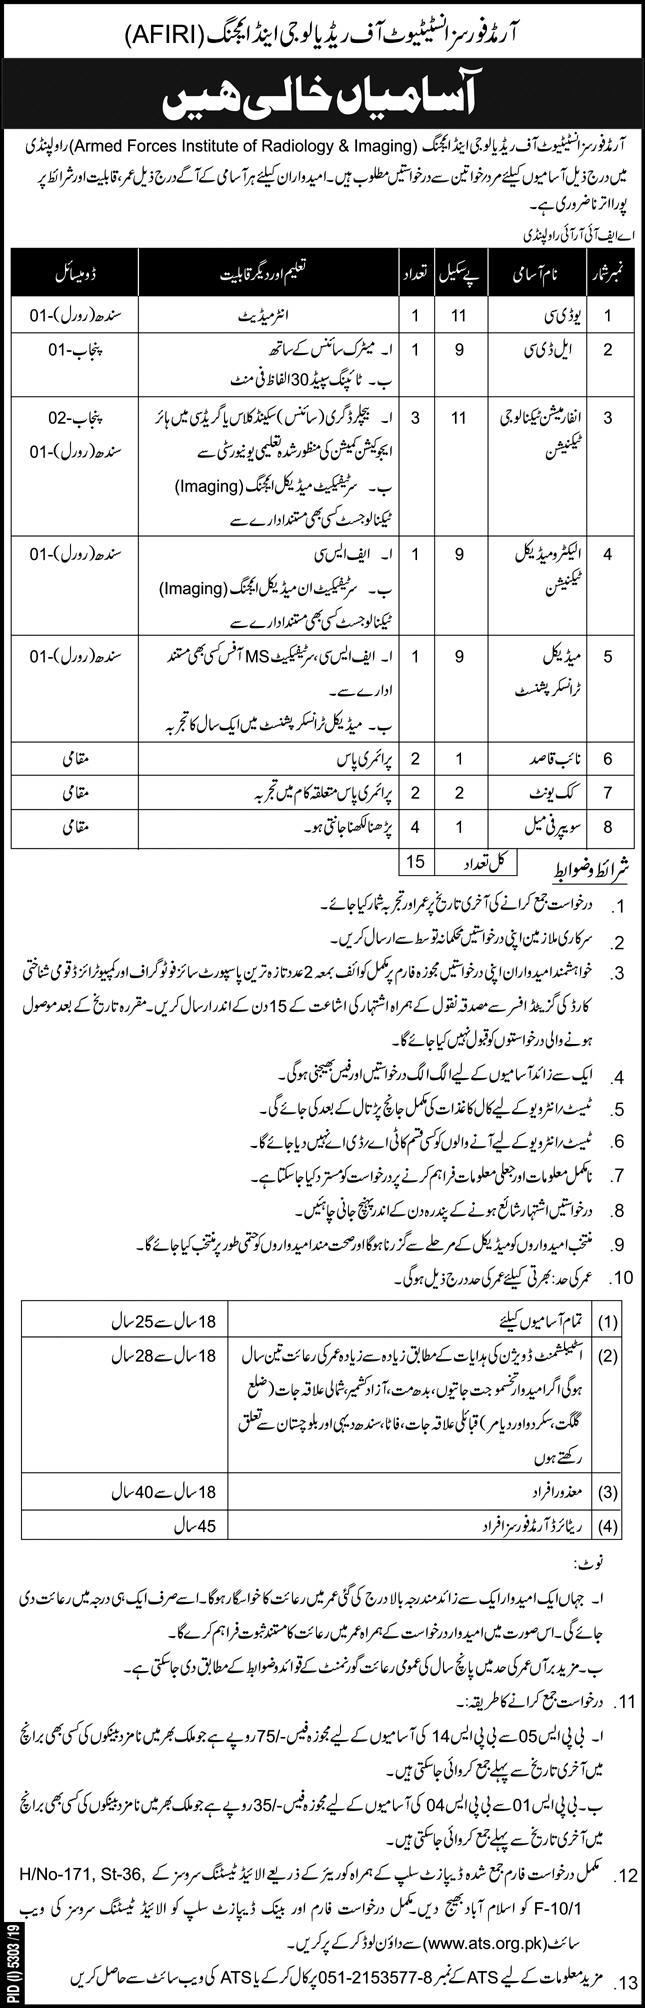 Armed Forces Institute Of Radiology Rawalpindi | Jobs in Pakistan 2020